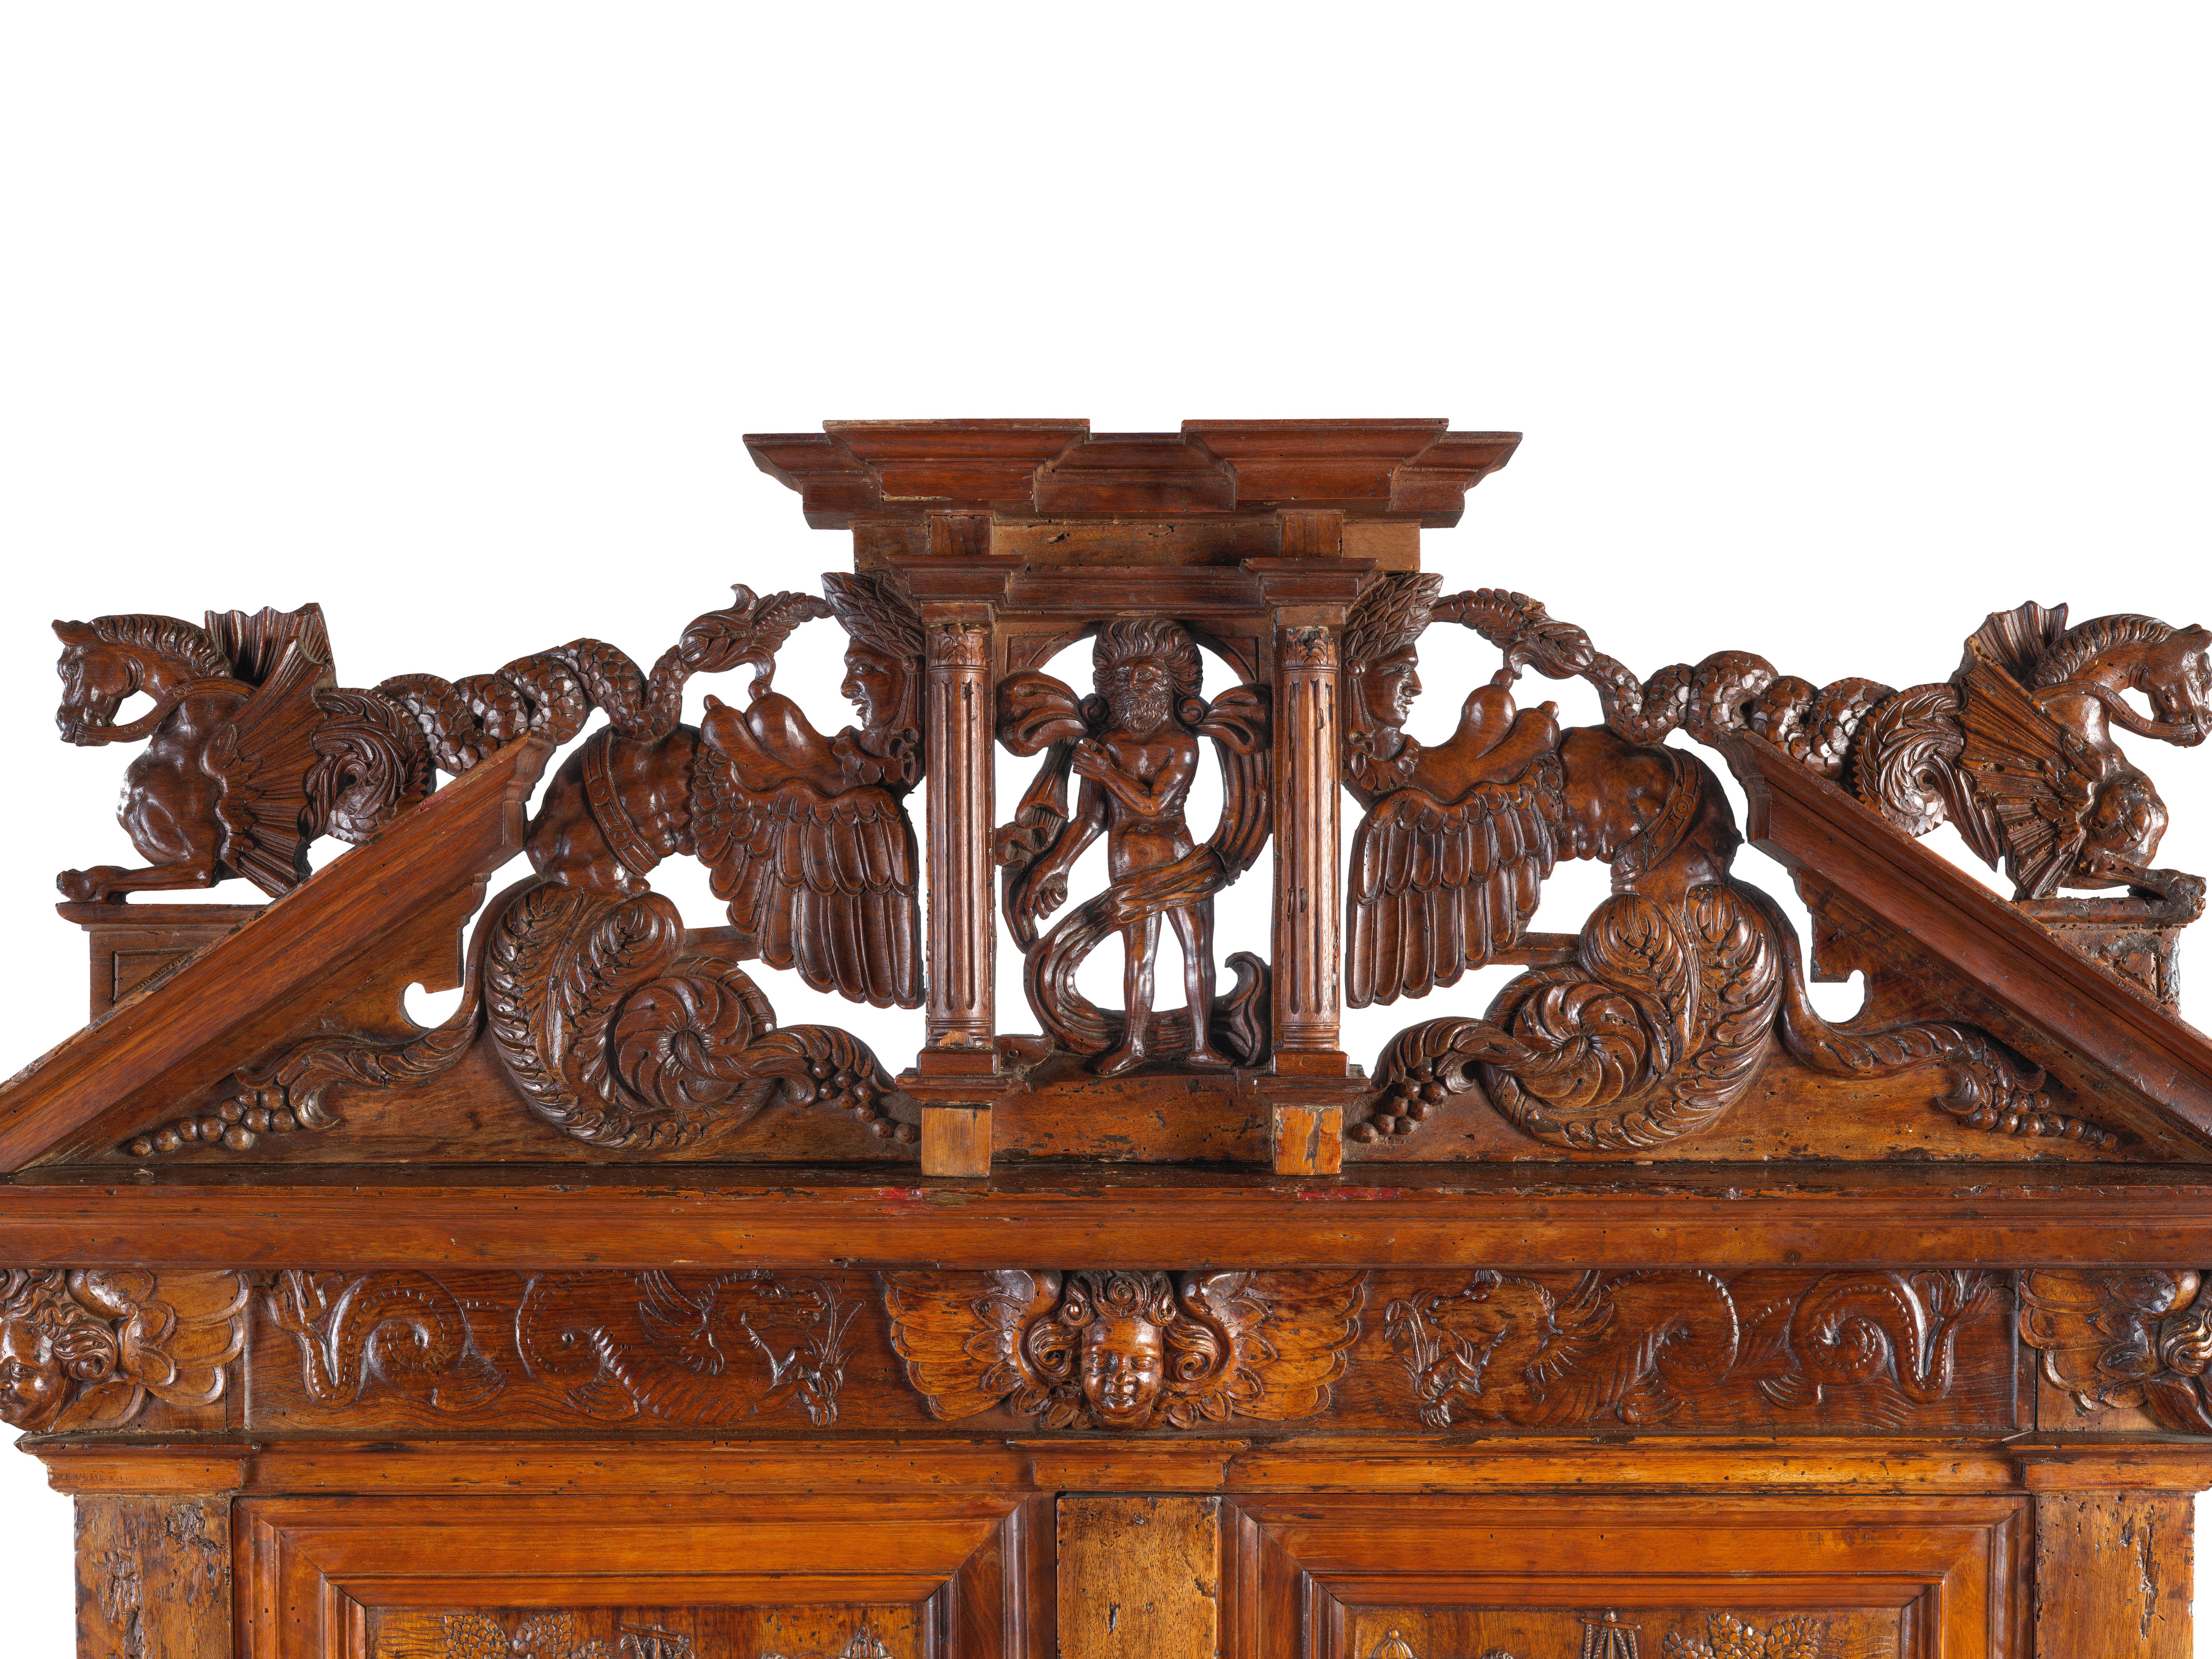 French 16th Century Cabinet with Knights Carving from Avignon Workshops 'France' For Sale